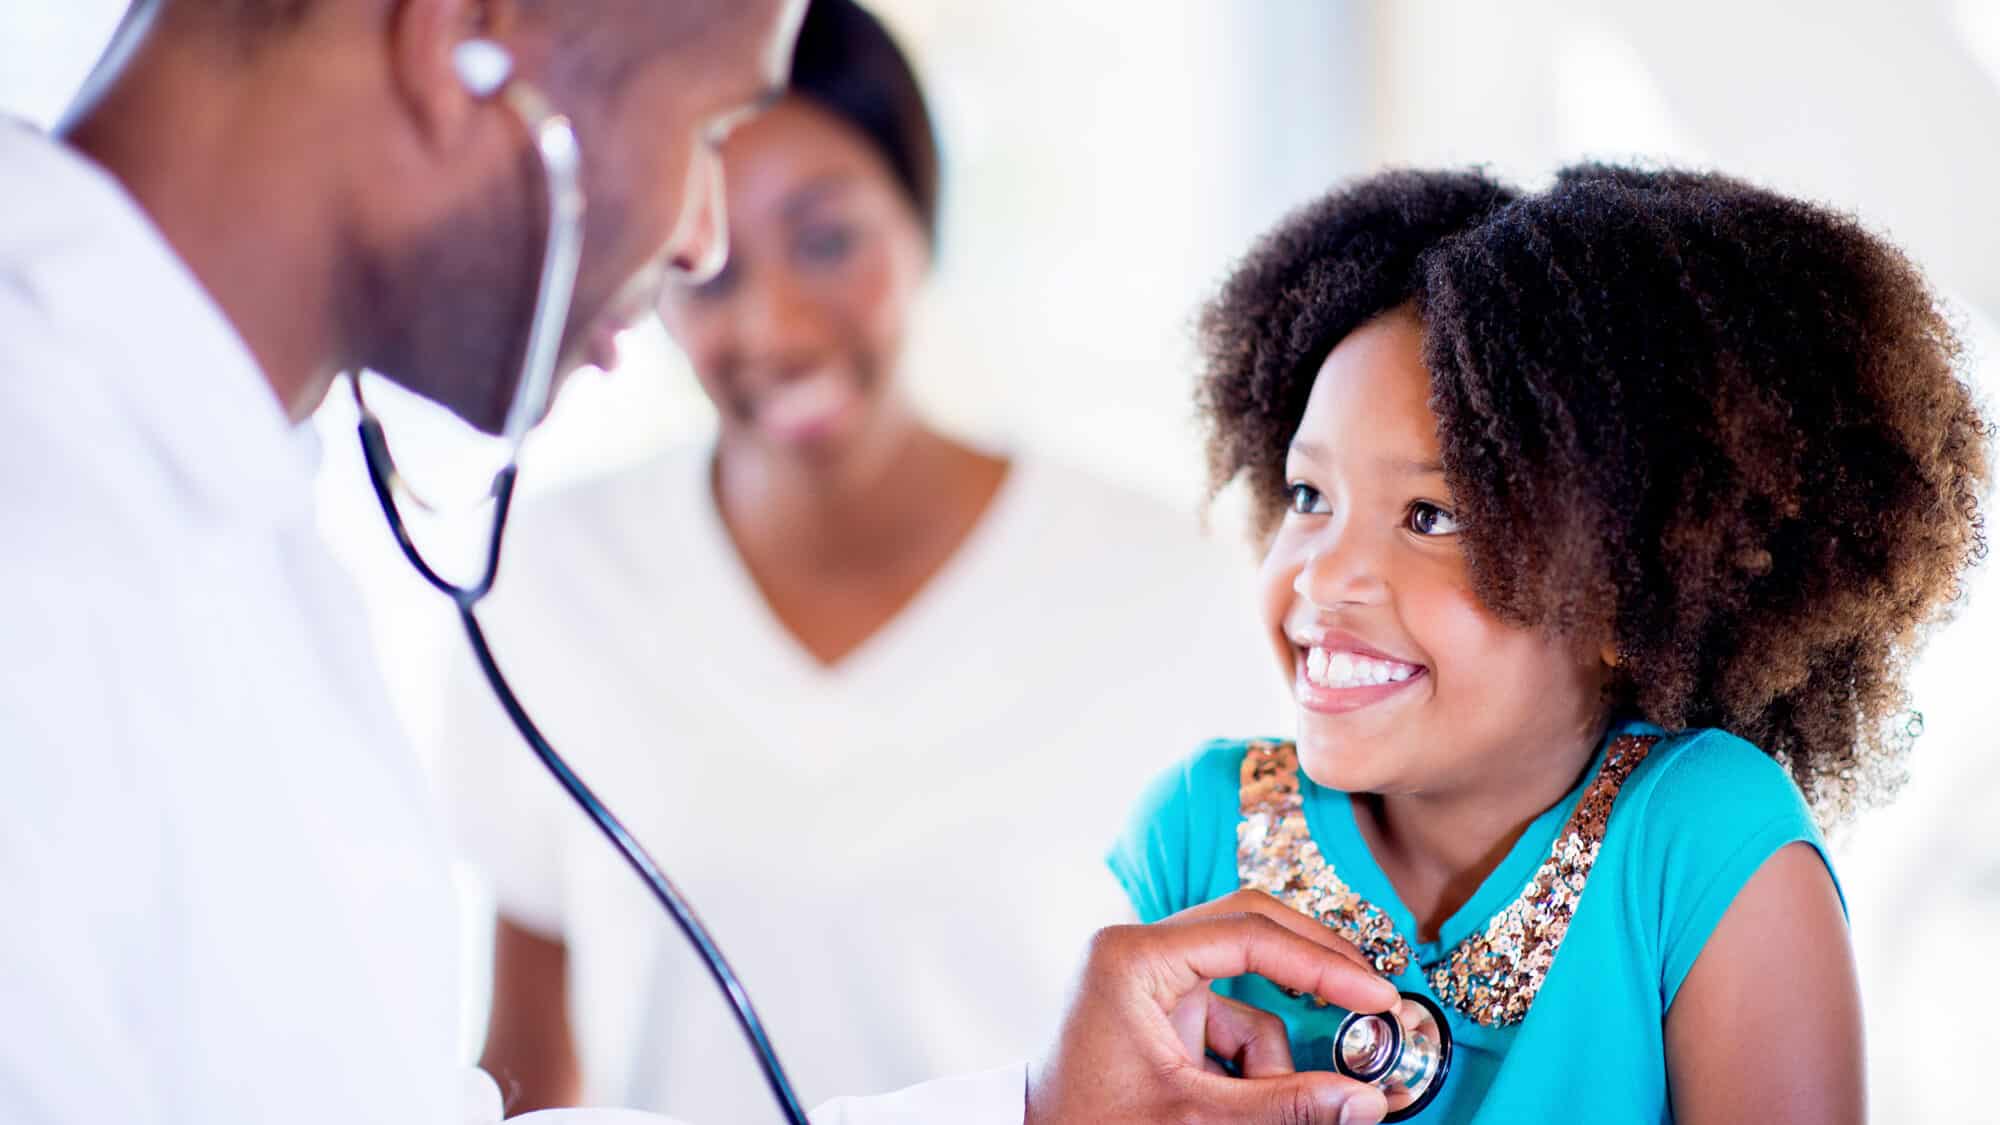 Pediatrician uses a stethoscope to listen to the heart of a smiling school-age child.